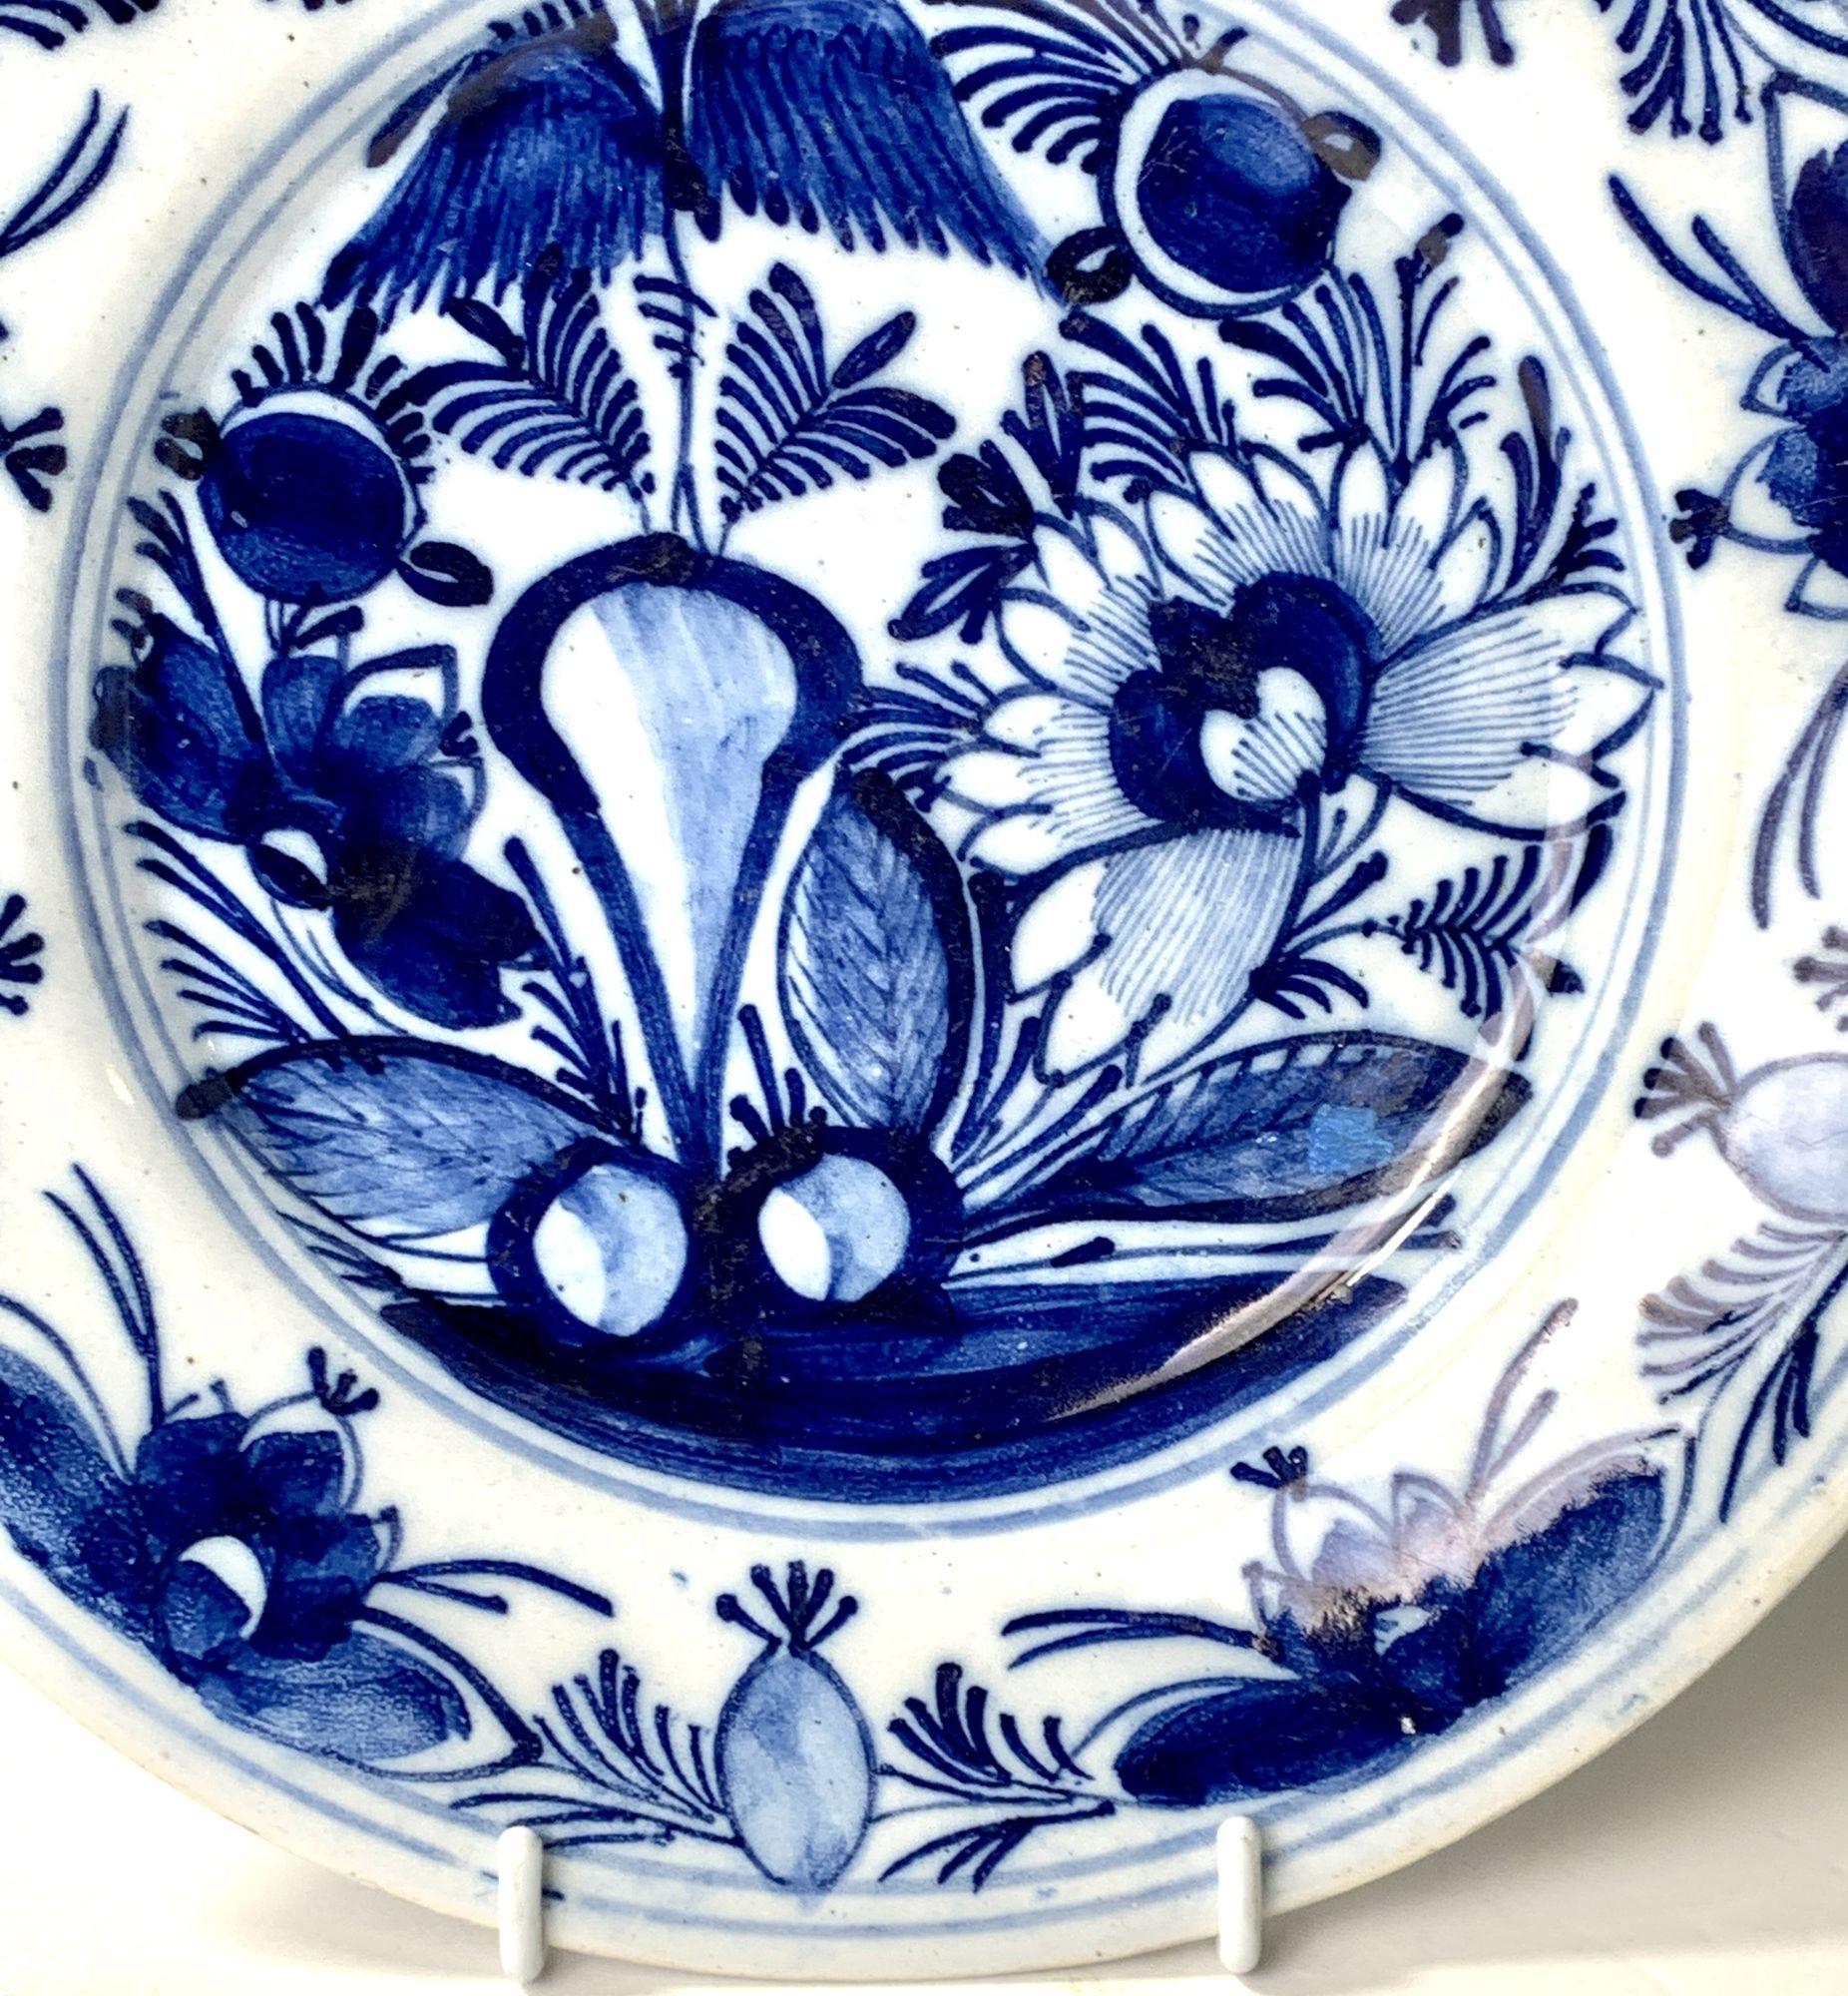 Blue and White Delft Dish Netherlands Circa 1800 In Excellent Condition For Sale In Katonah, NY